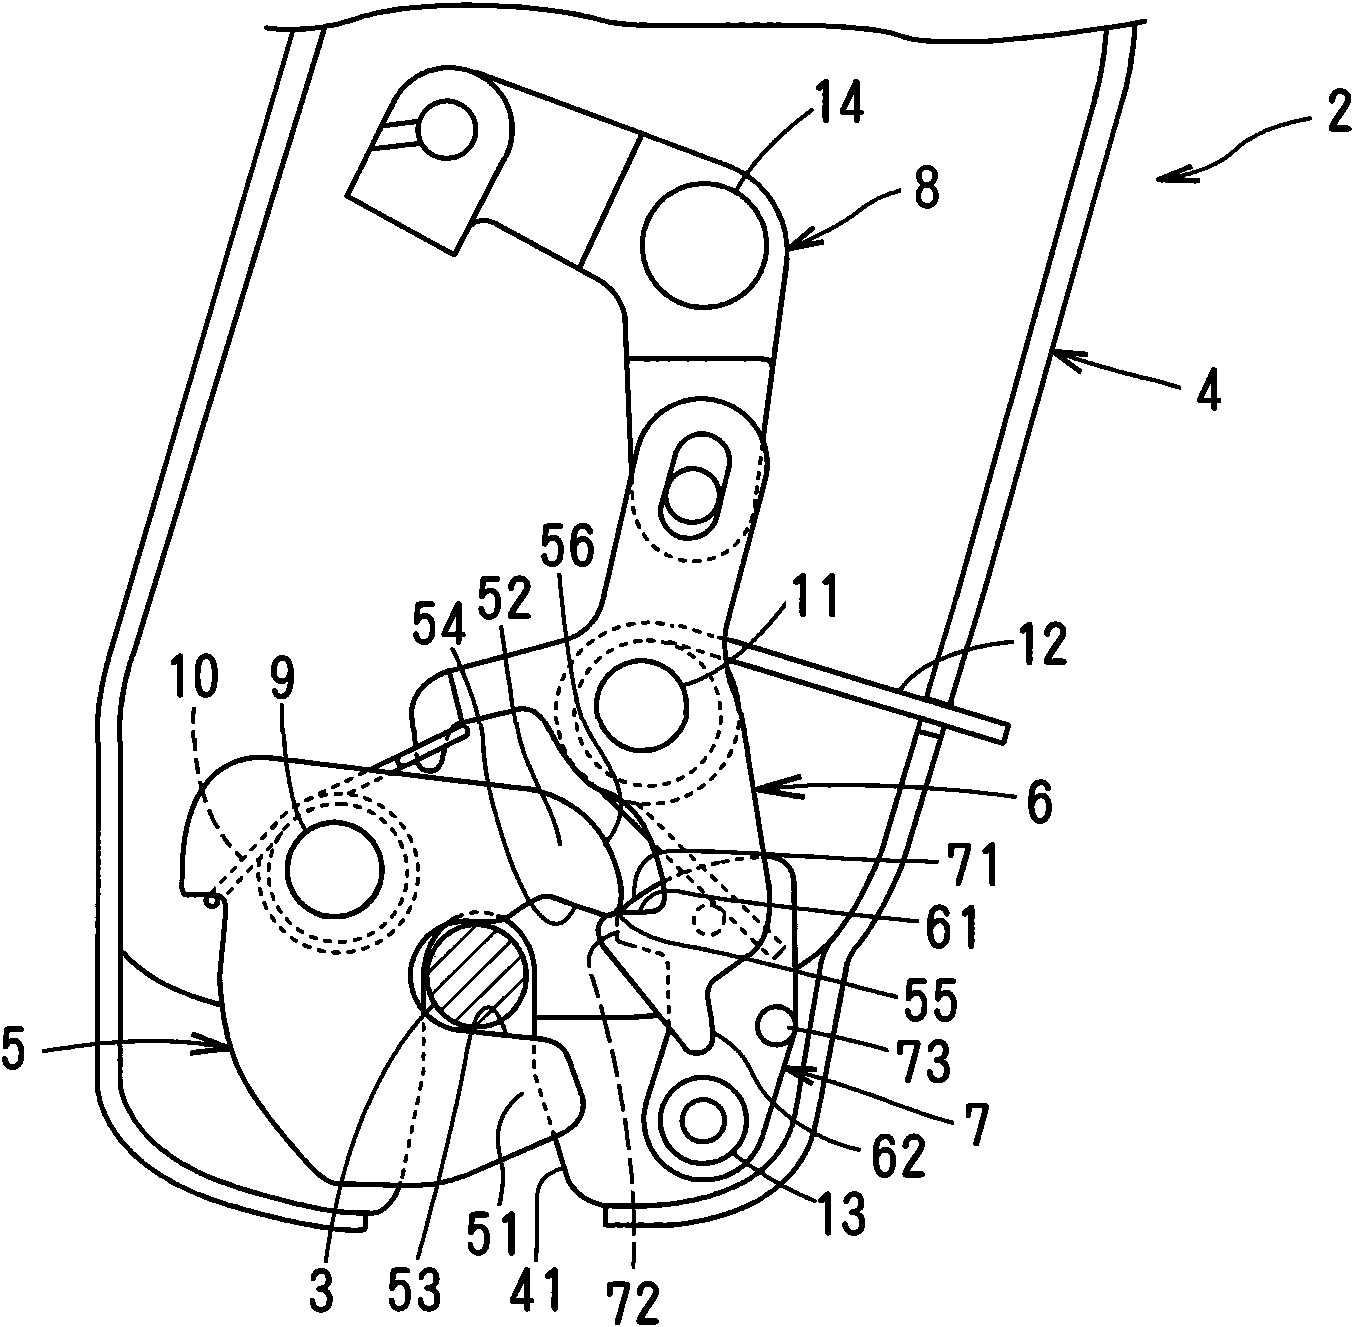 A latch device in a vehicle